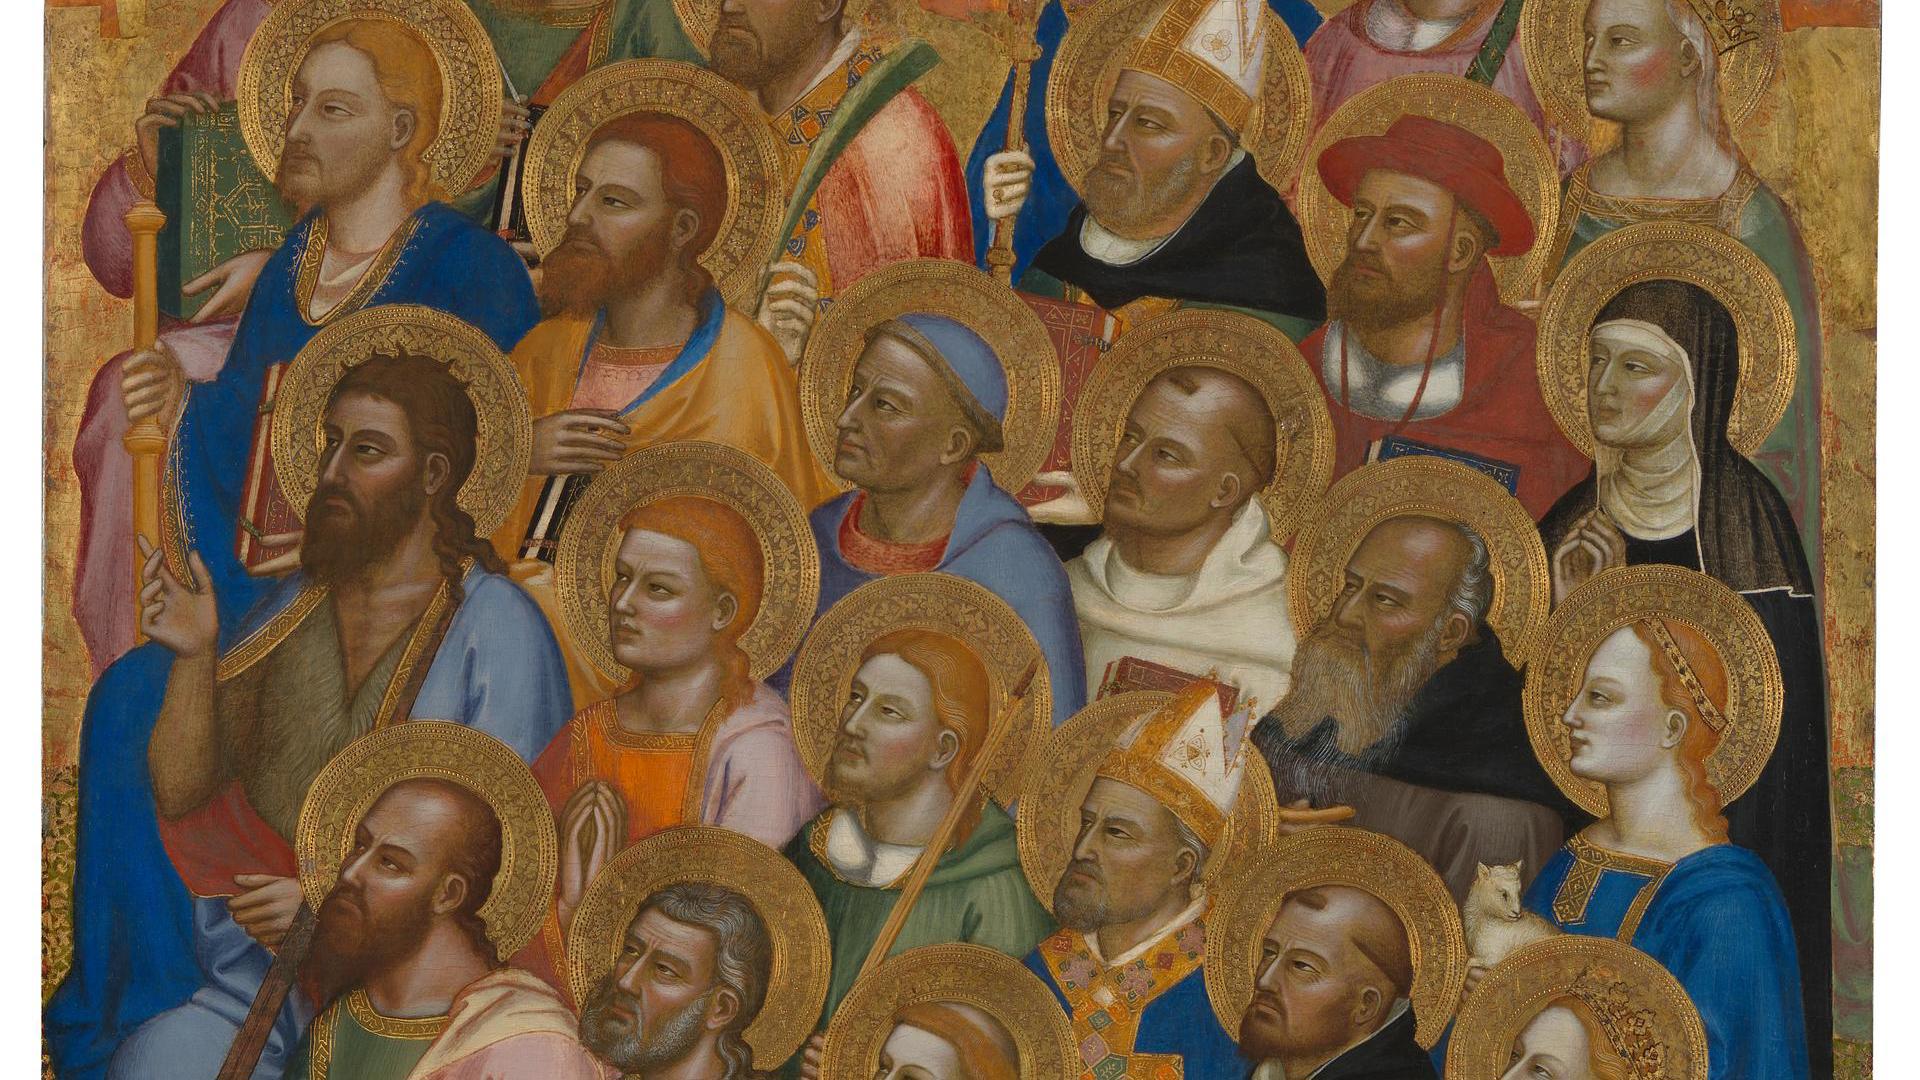 Adoring Saints: Right Main Tier Panel by Jacopo di Cione and workshop